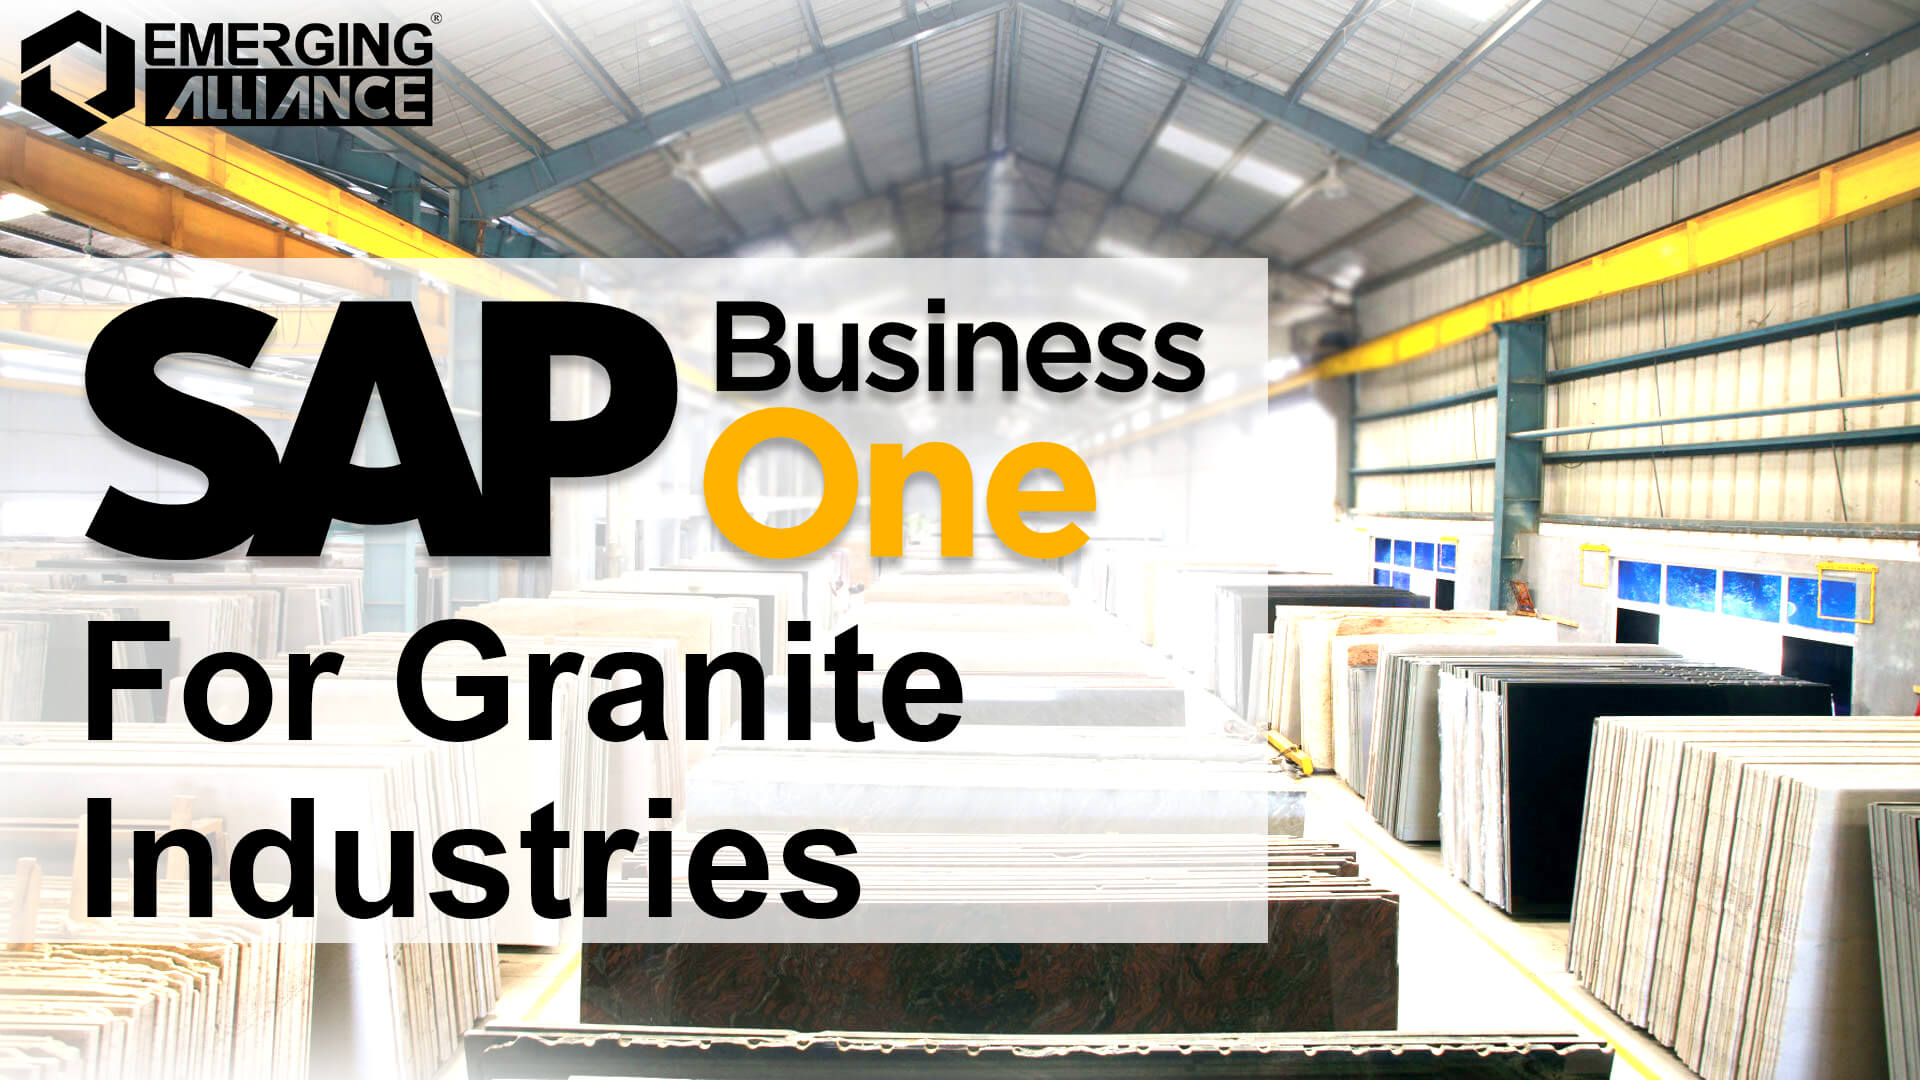 sap business one for granite industries